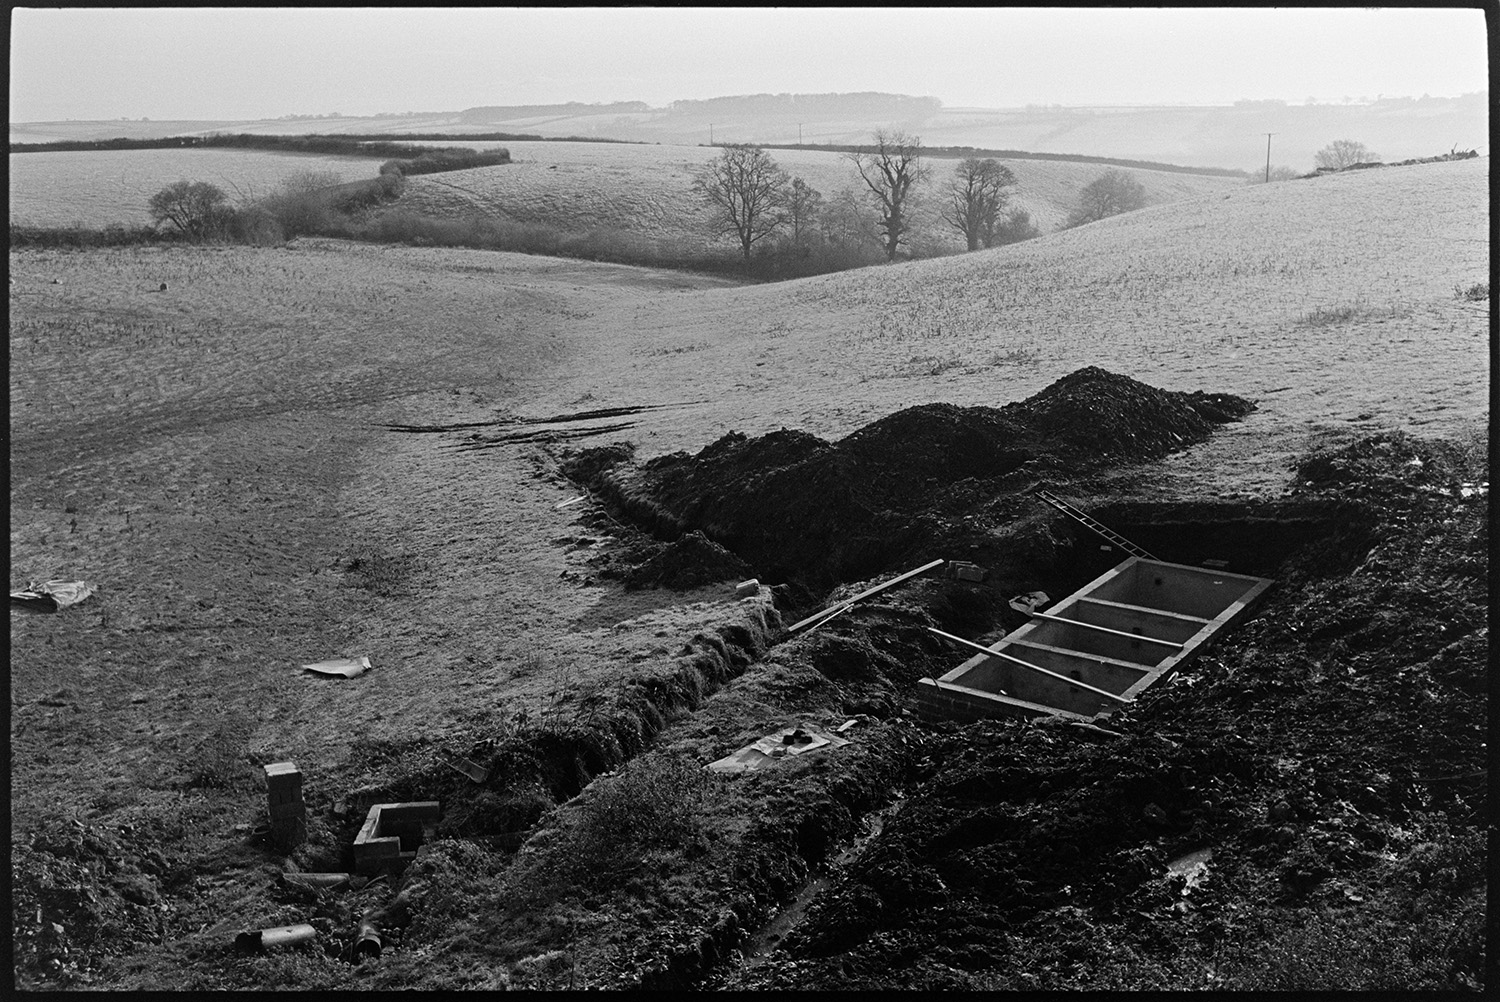 Slurry pit under construction. 
[The foundations of a slurry pit in a field at Parsonage Farm, Chulmleigh. A landscape of fields, hedgerows and trees can be seen in the background.]